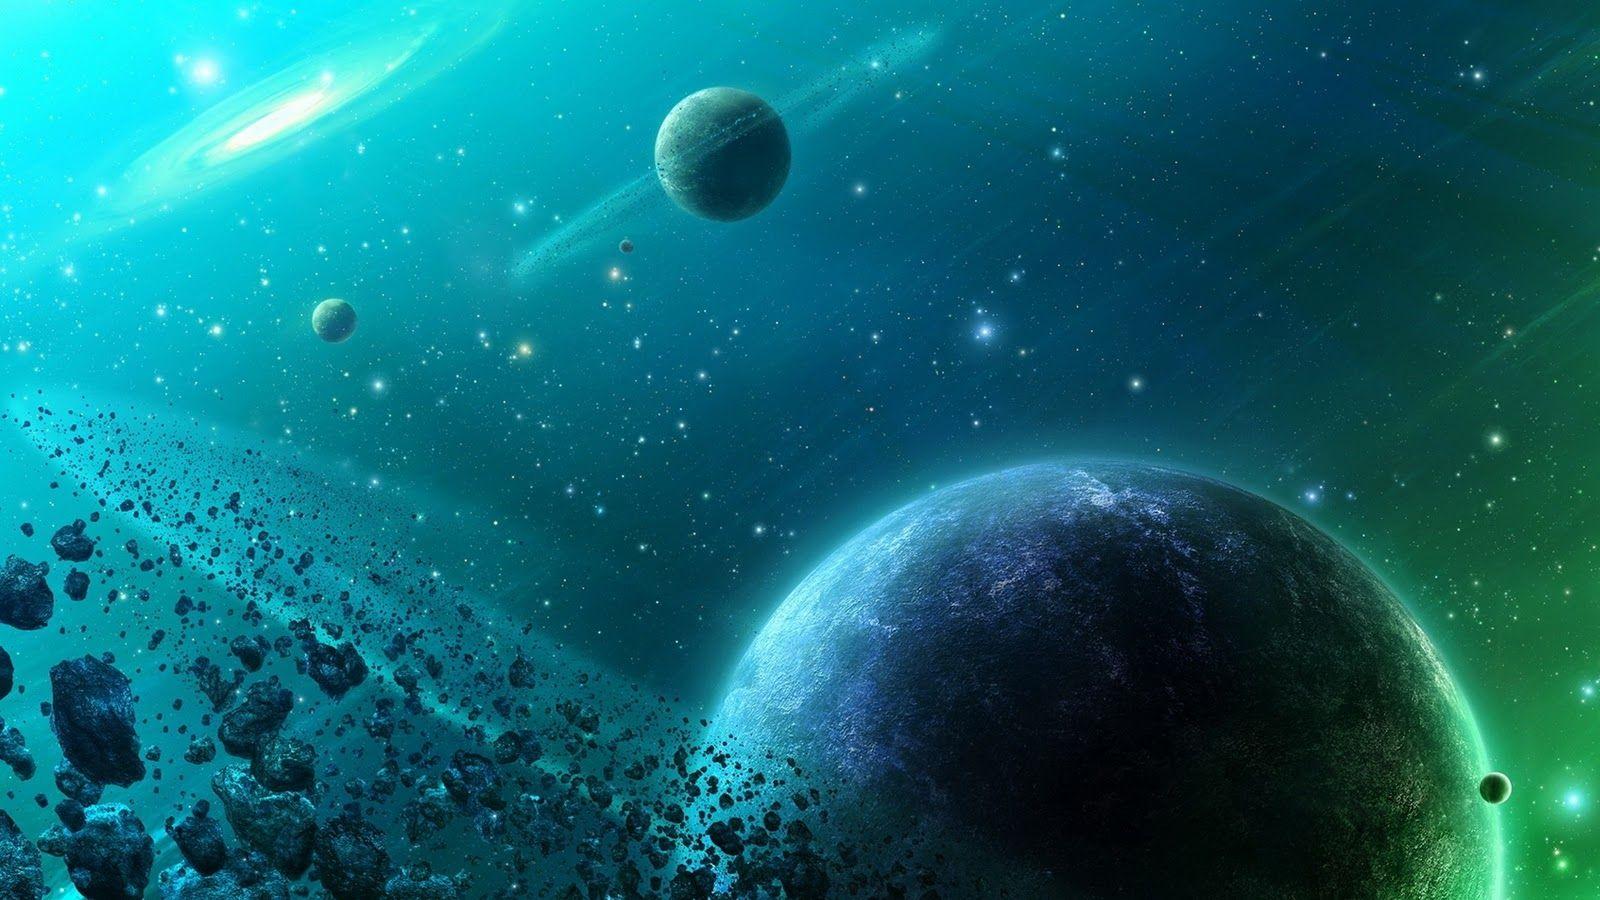 HD Space Live Wallpaper - Apps on Google Play